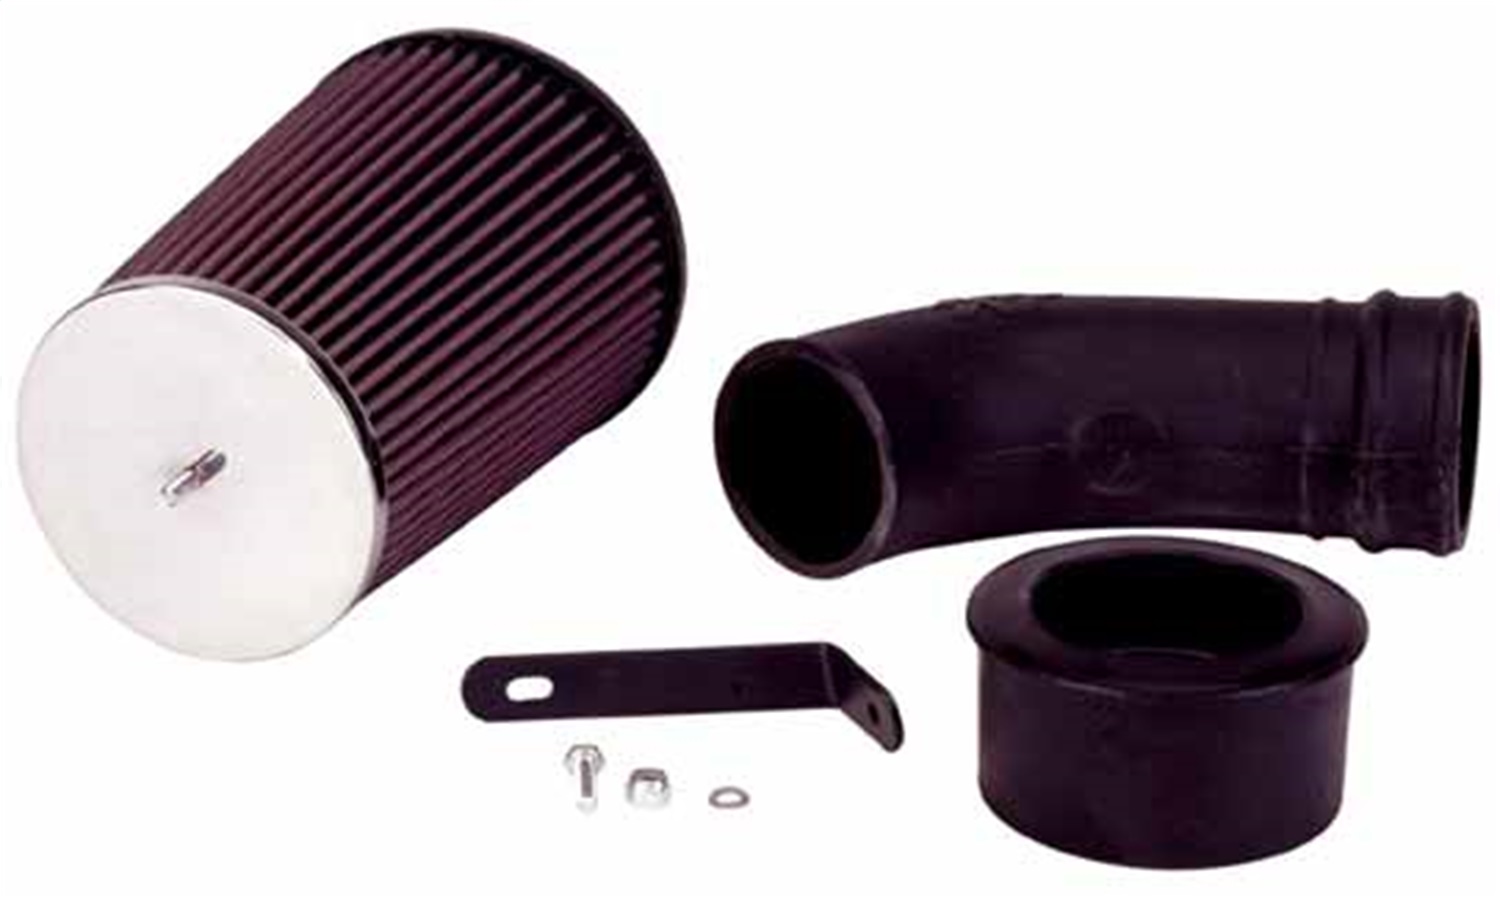 K&N Filters K&N Filters 57-3503 Filtercharger Injection Performance Kit Fits 88-91 Civic CRX